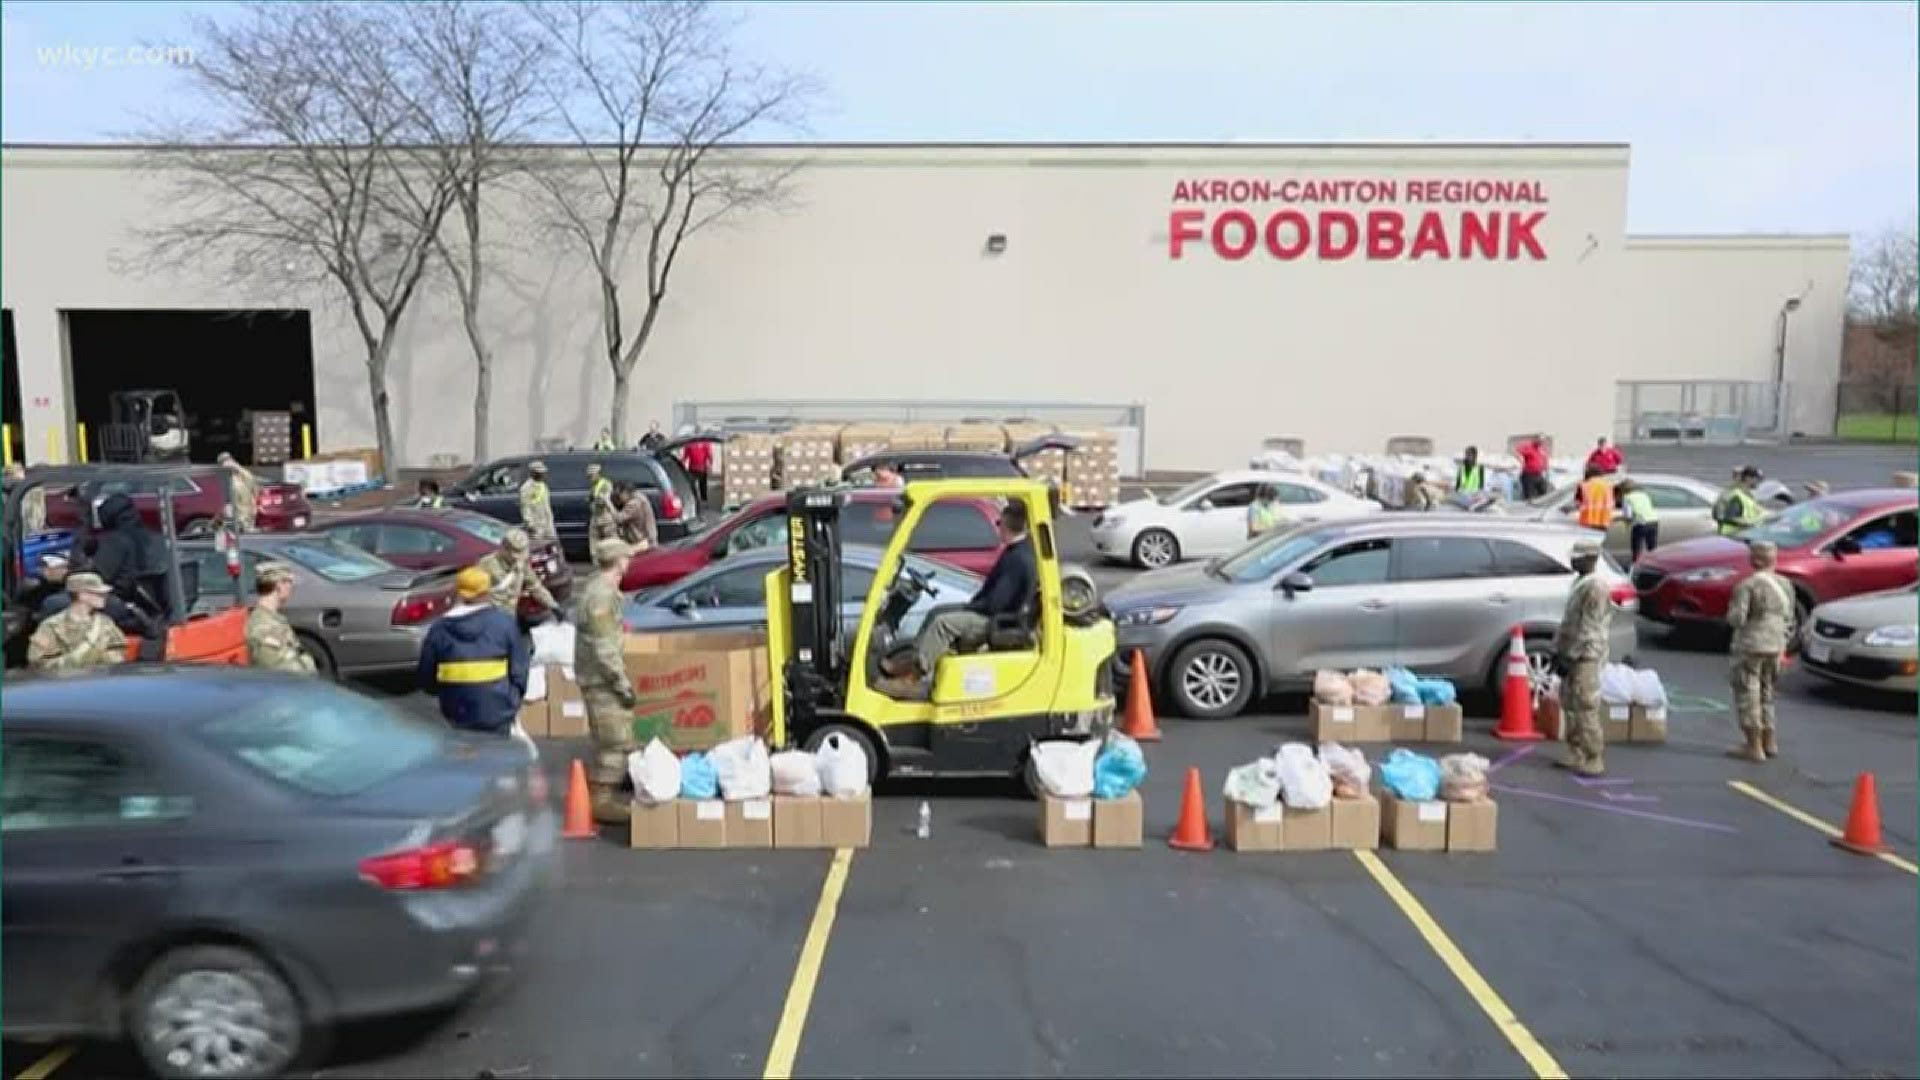 3News is leading a fundraiser for the Akron-Canton Foodbank. Make a donation through April 12 and contributions will be matched up to $100,000.